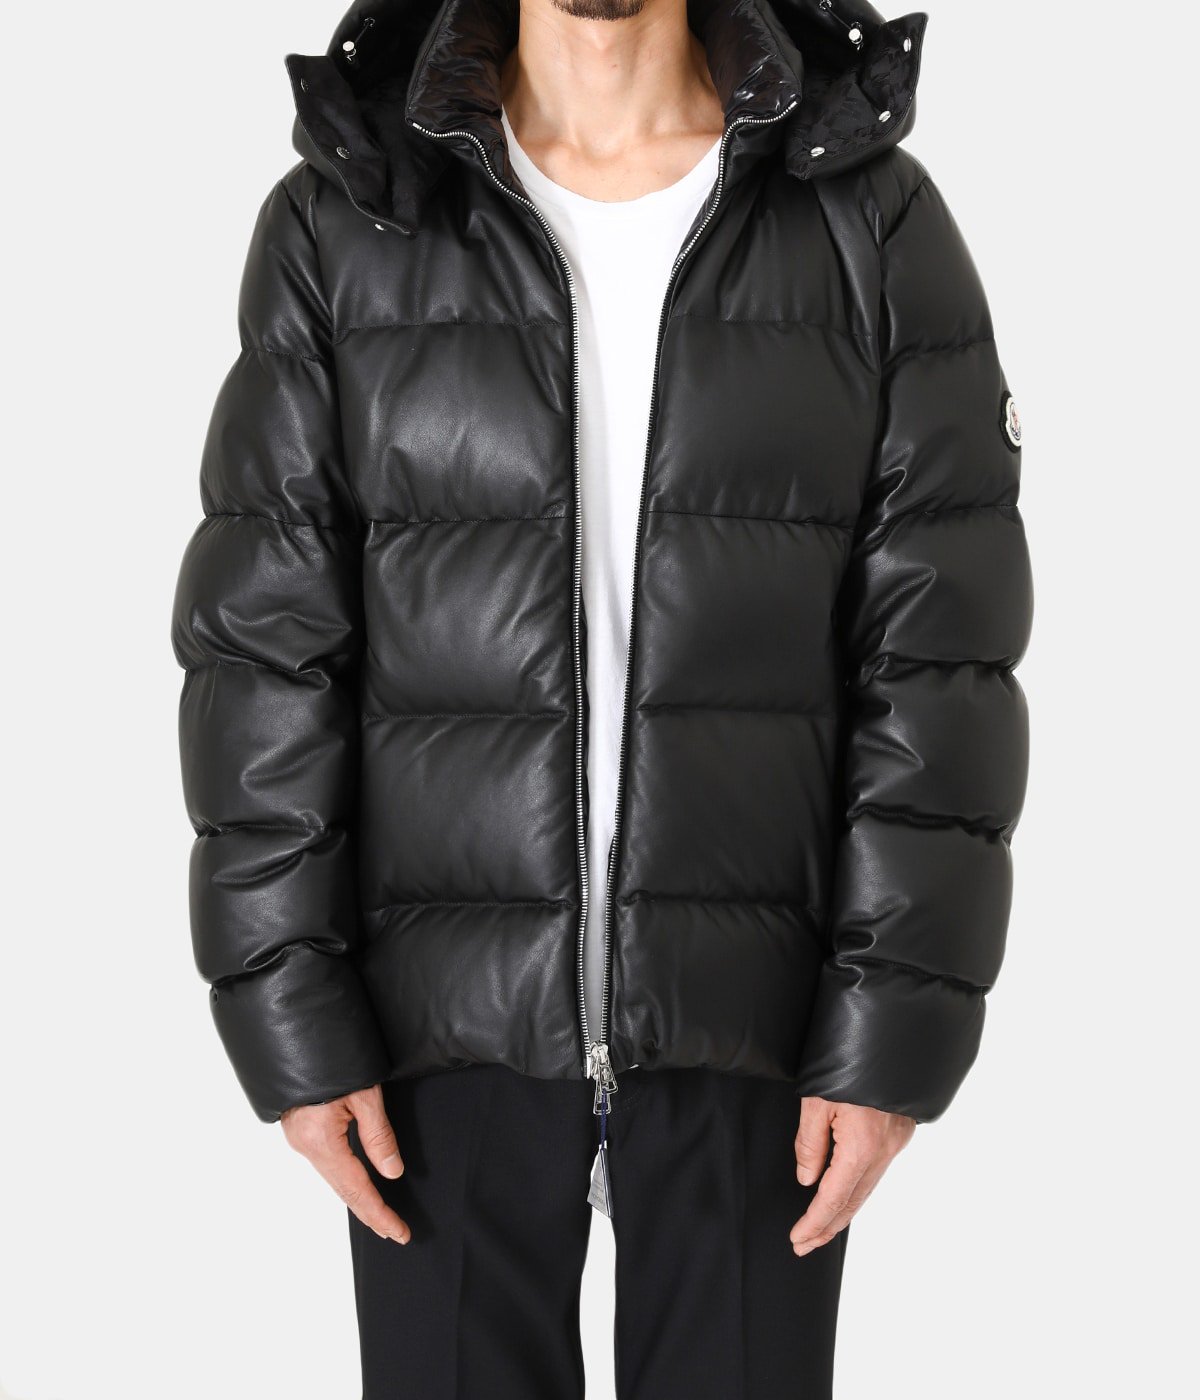 DAUPHINELL JACKET | MONCLER(モンクレール) / アウター ダウン・中綿